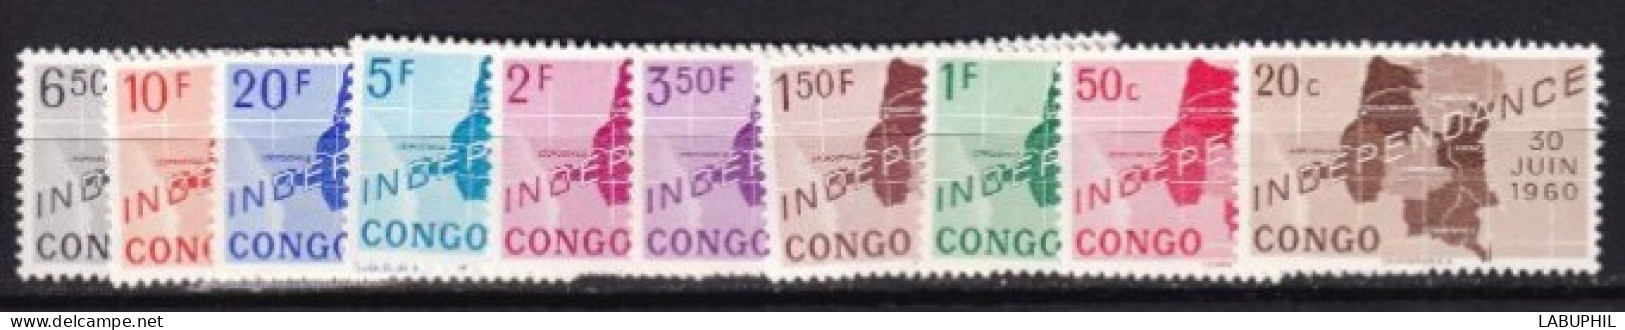 CONGO  MNH **  1960 - Unused Stamps